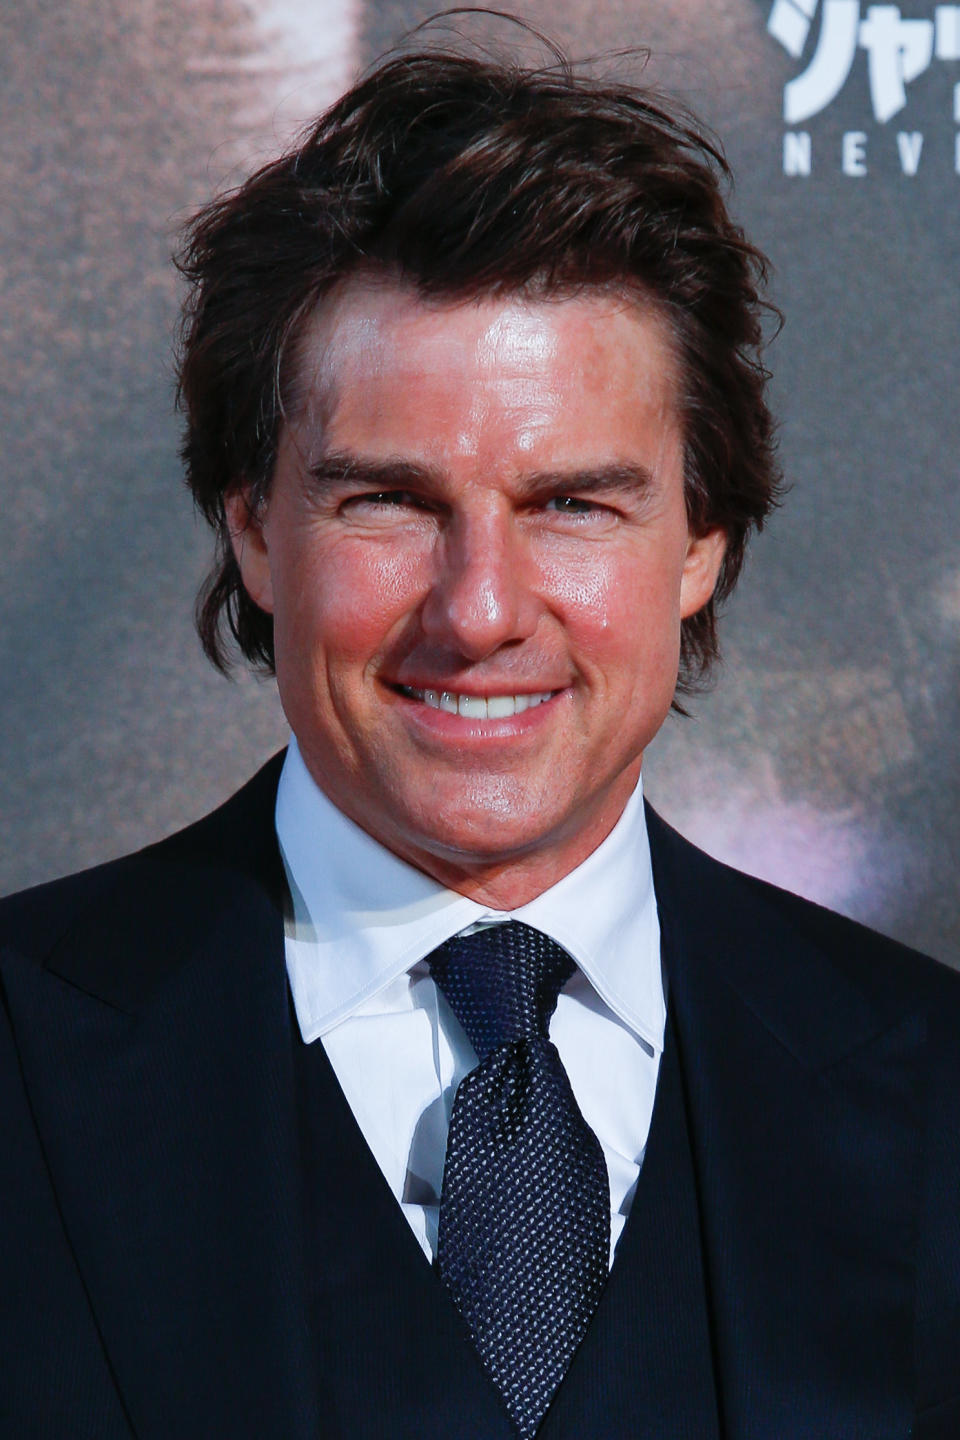 Despite three high-profile opposite sex marriages, the "Top Gun" star has been the subject of gay speculation for years. In 2003, he won a $10 million default judgment in a case against a gay porn actor who claimed the two had an affair, and two years earlier, he sued Los Angeles-based publisher Michael Davis for $100 million after Davis claimed to have a videotape of Cruise engaged in homosexual acts. As People&nbsp;<a href="http://www.people.com/people/article/0,,625389,00.html">reported</a>, the suit was eventually dropped, and Davis eventually stated that Cruise "is not, and never has been, homosexual and has never had a homosexual affair."